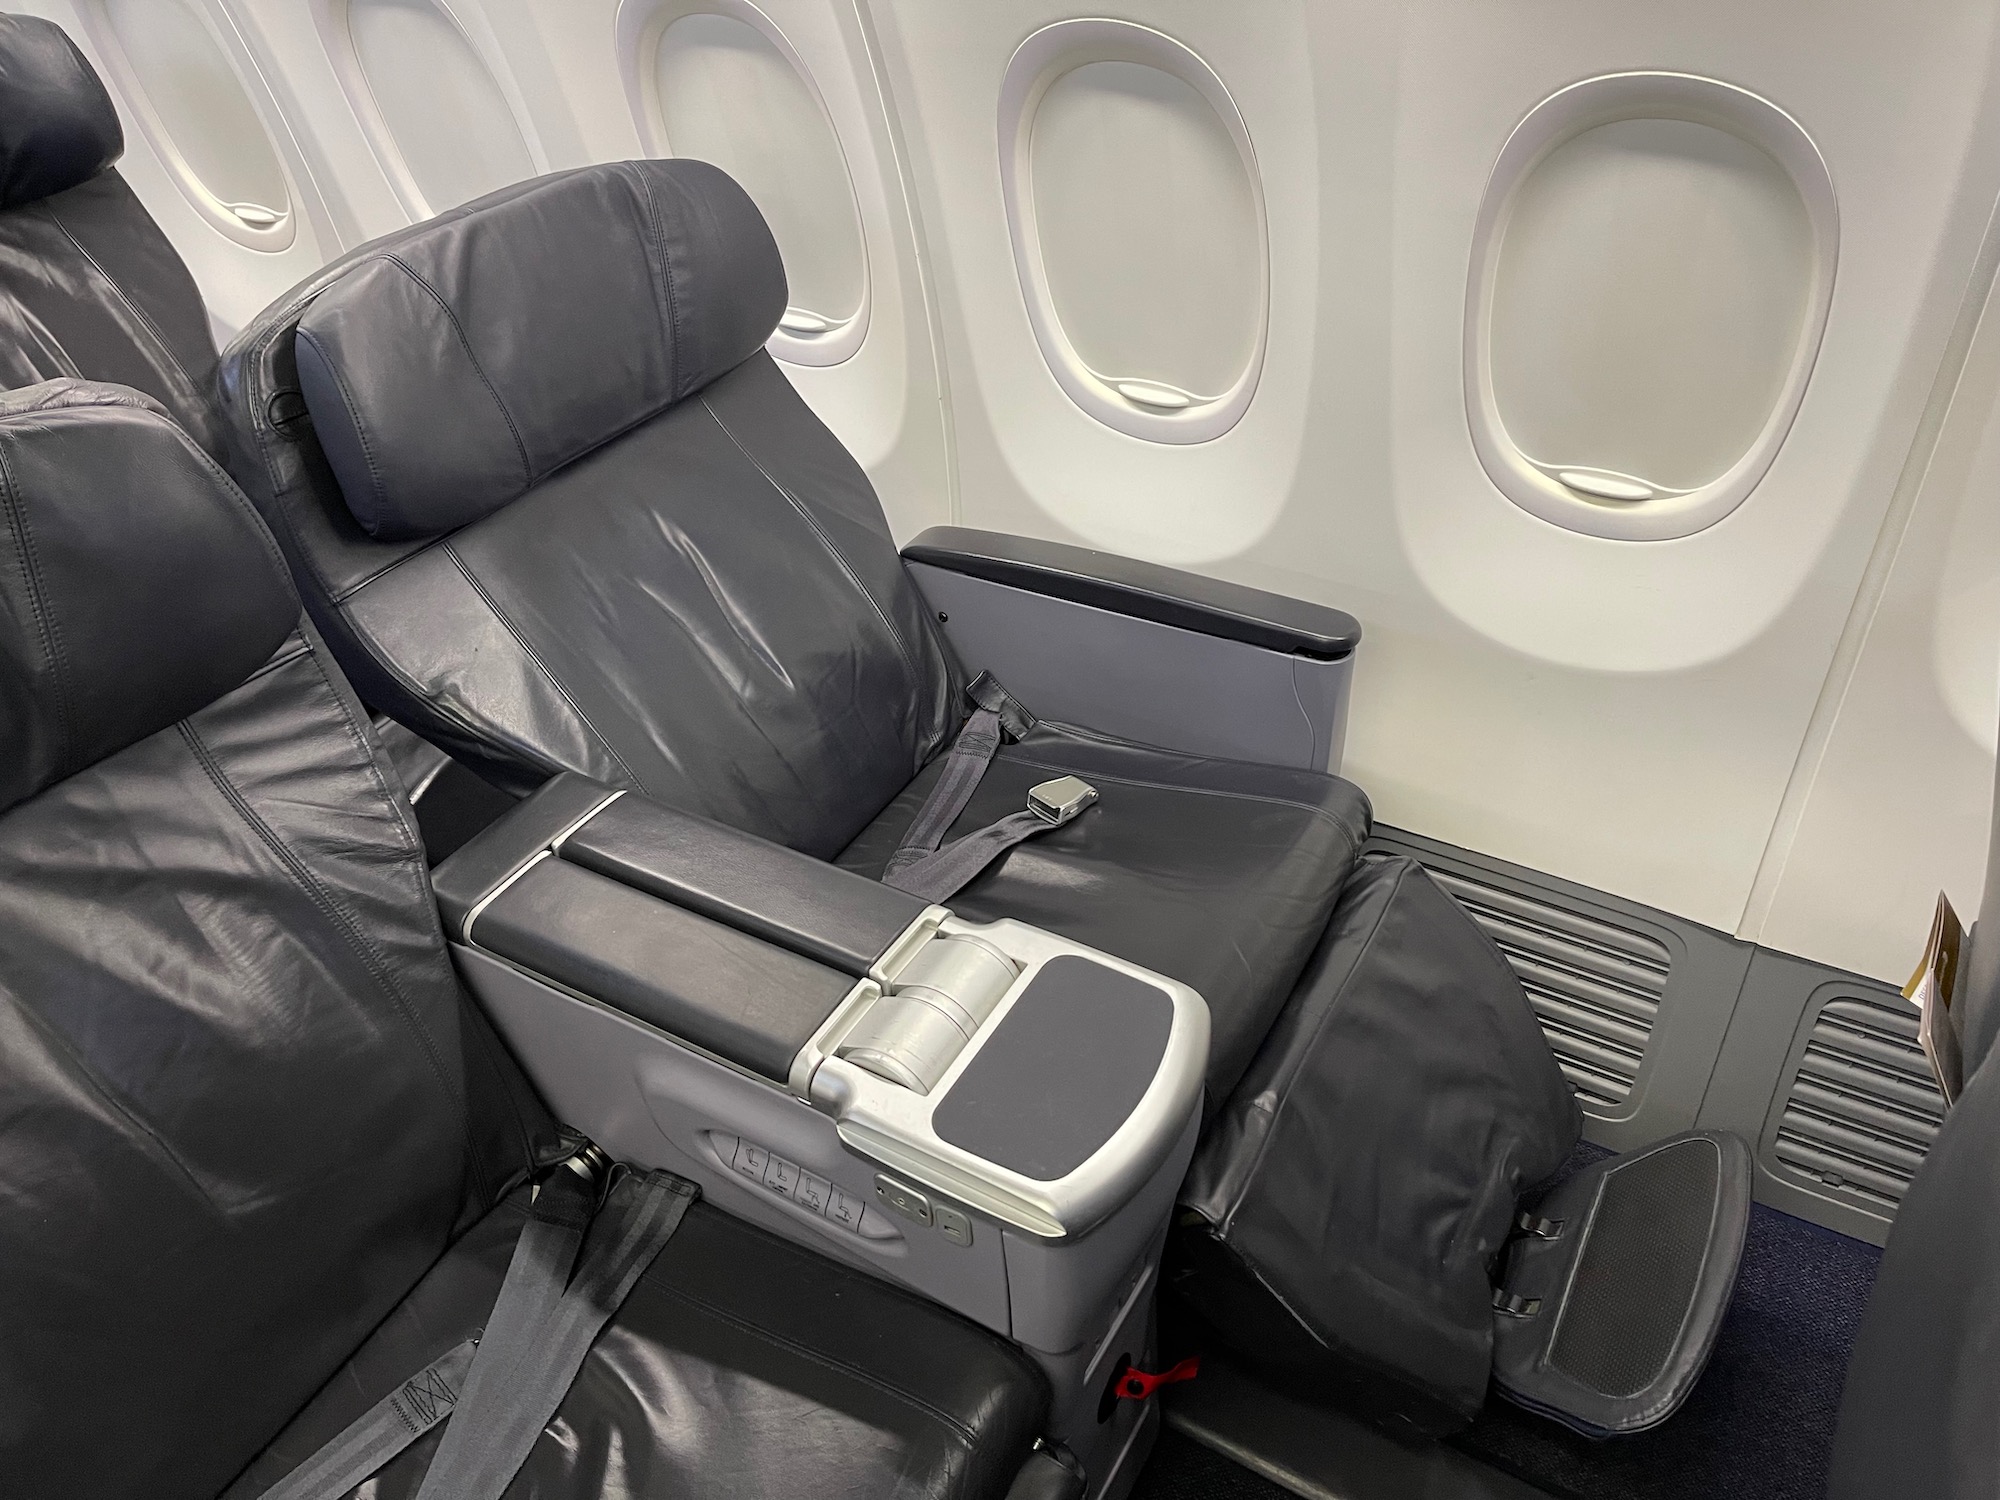 Review: Copa Airlines B737-800 in Business and Economy Class